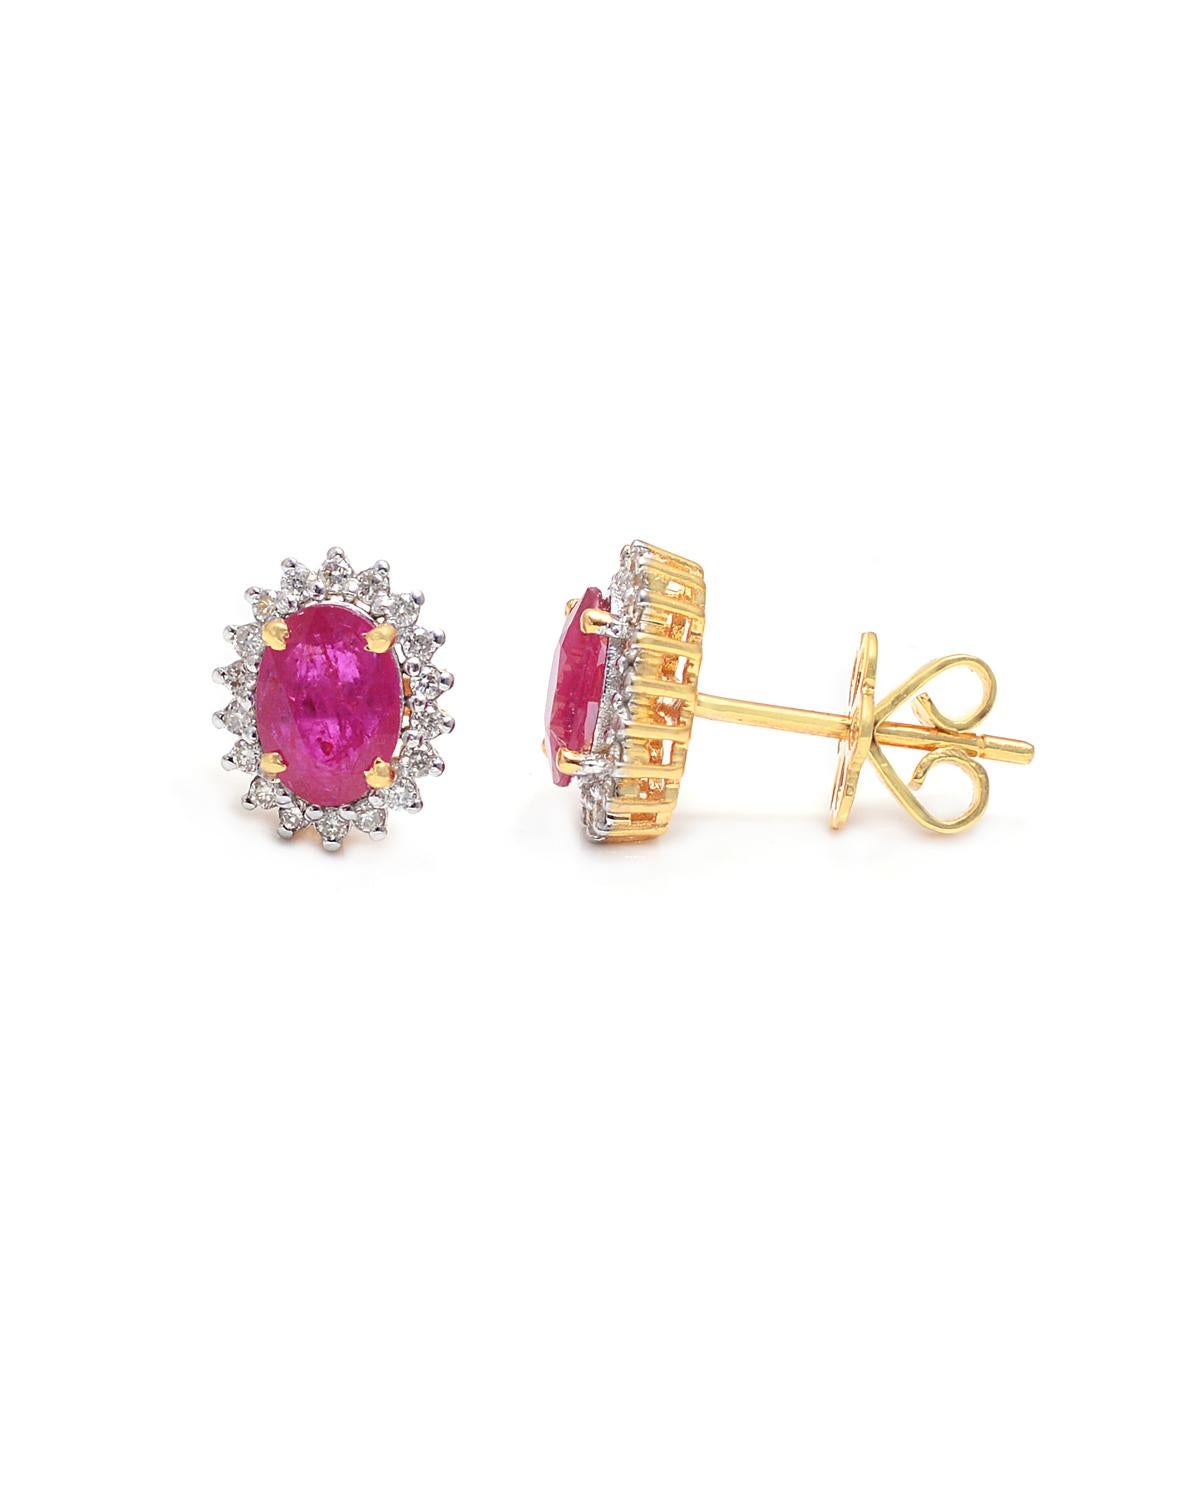 Ruby Stud Earrings with Diamond in 14k Gold For Sale